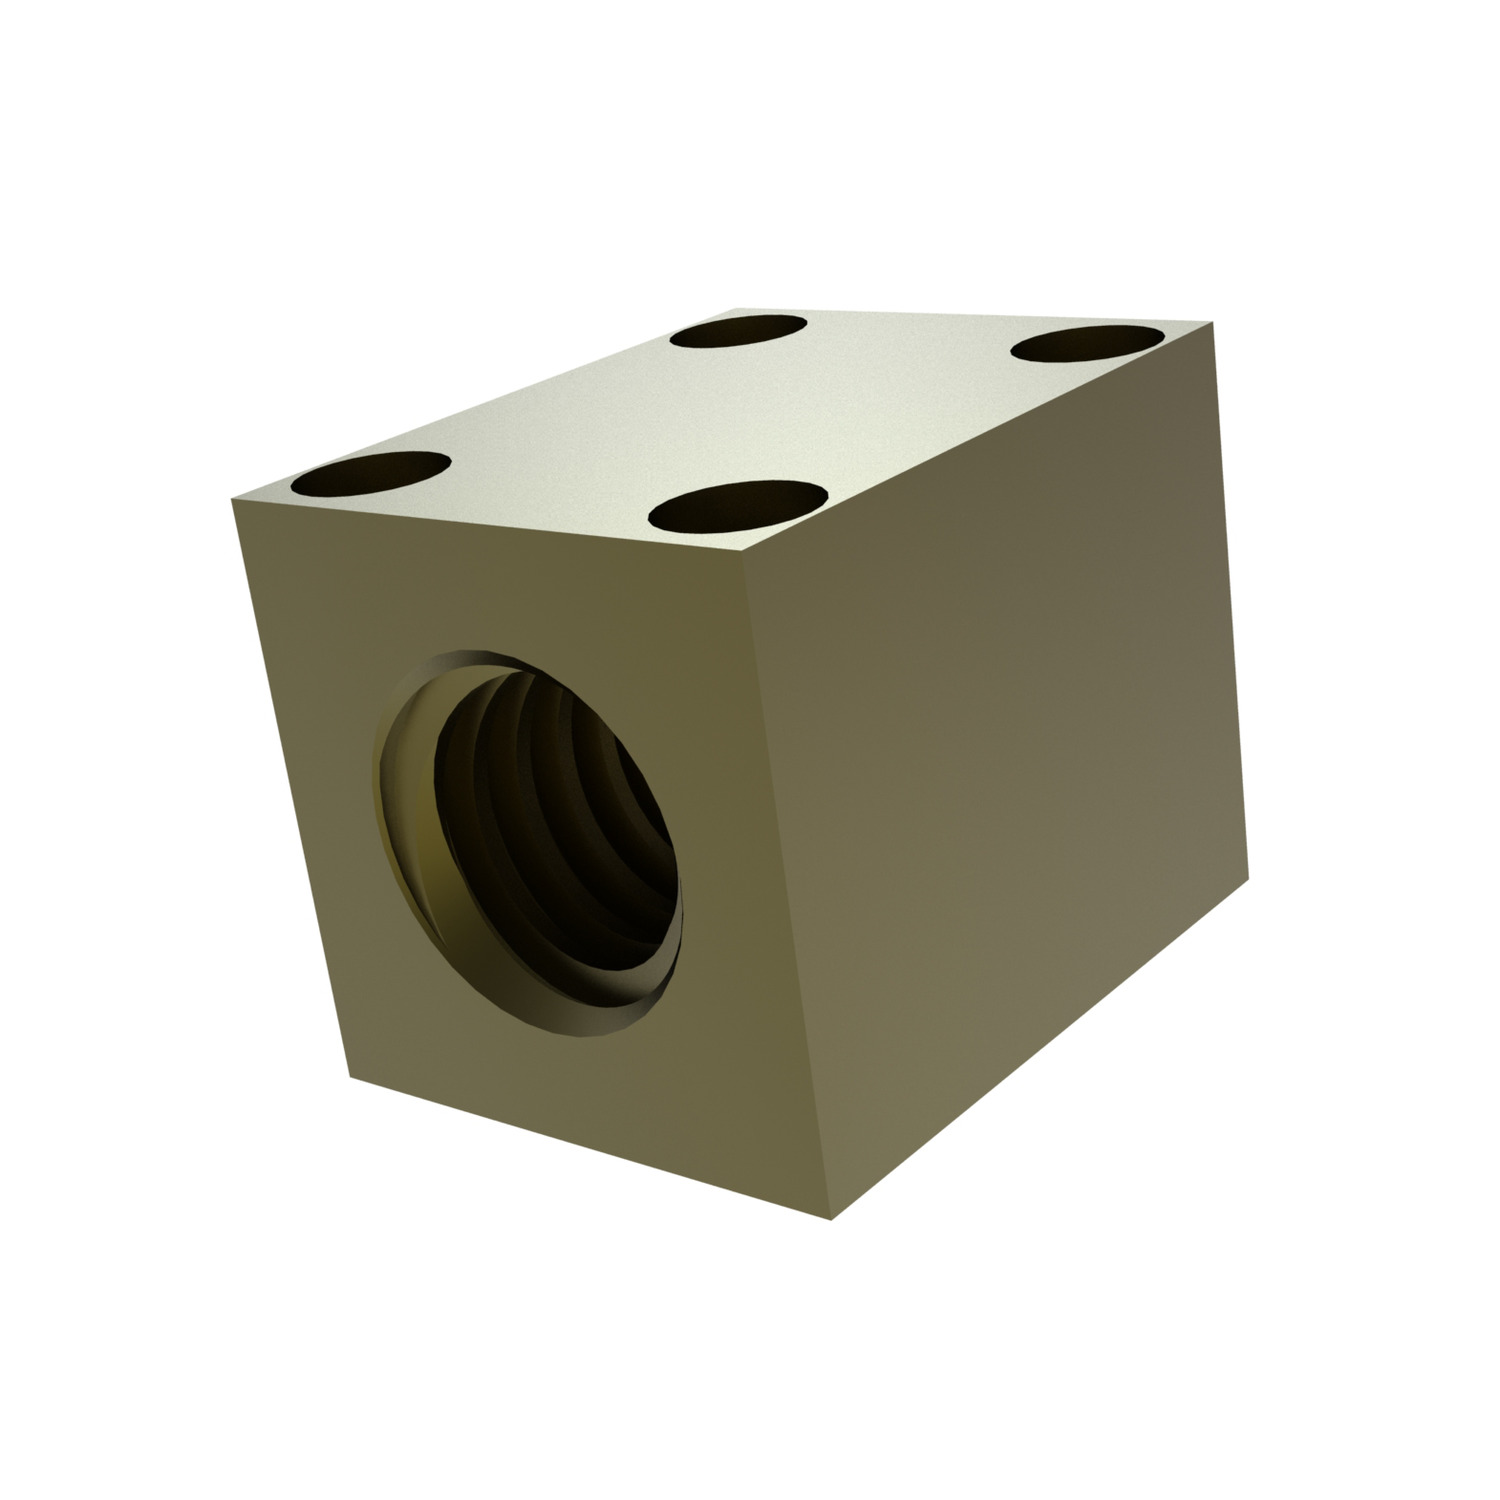 L1334 - Square Bronze Nut with Through Holes